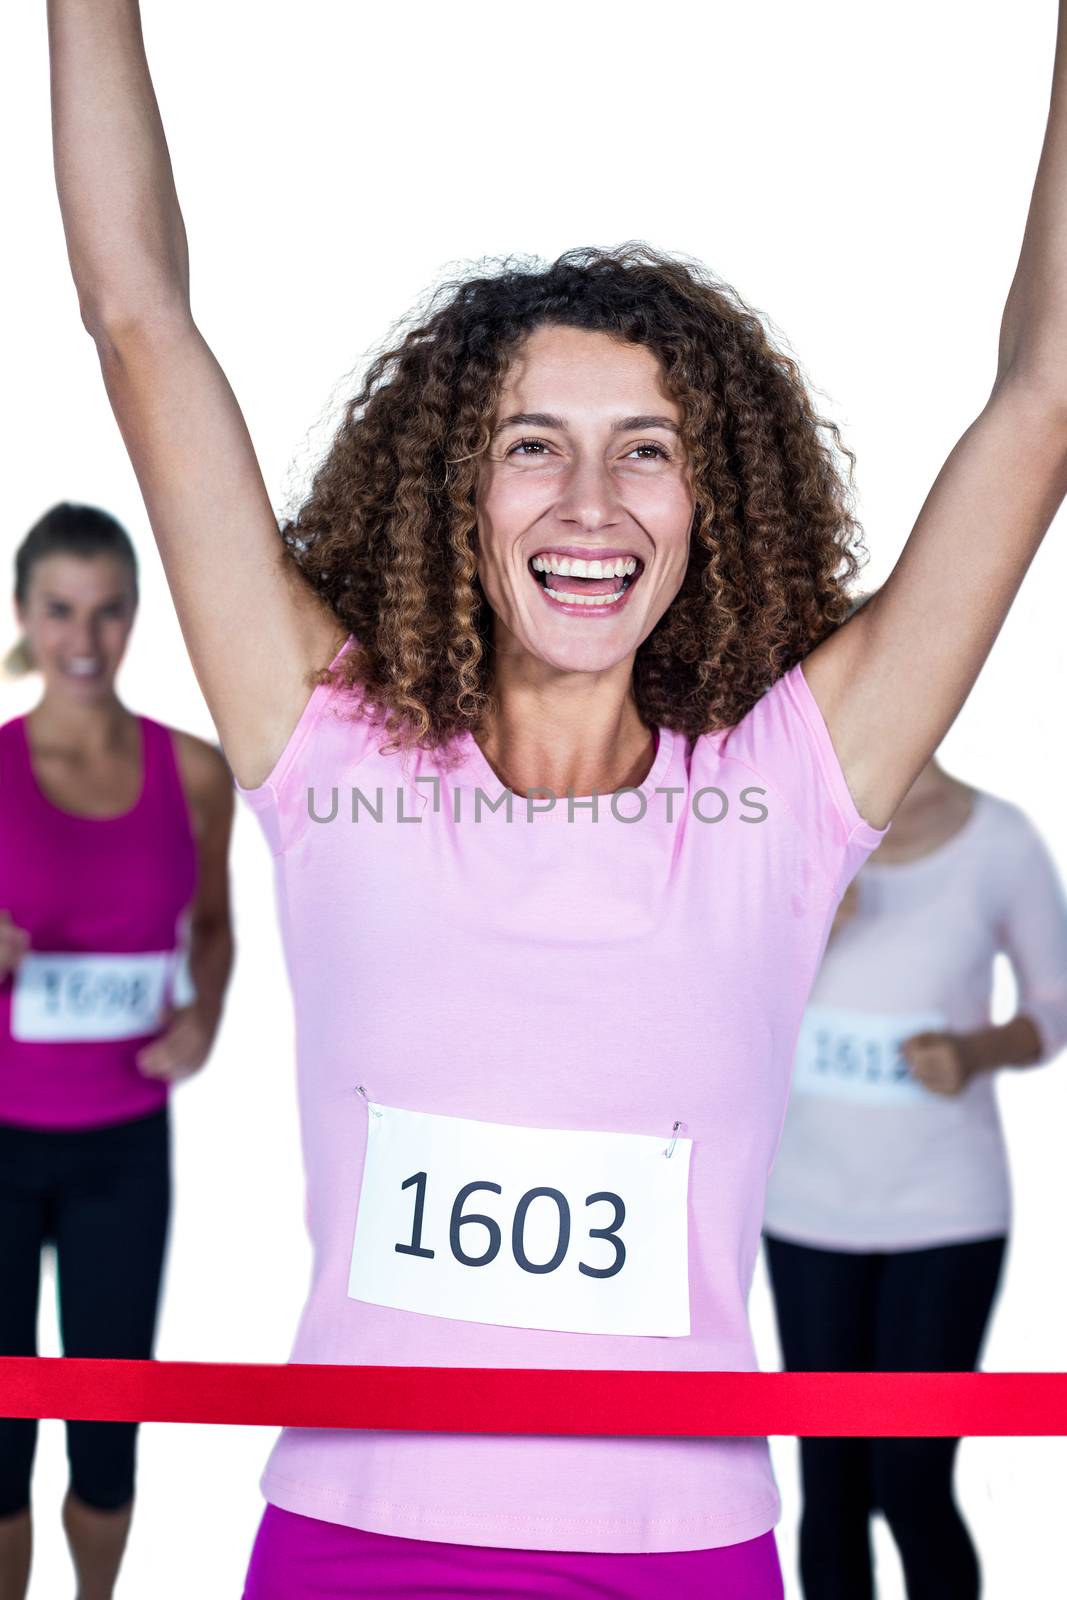 Smiling winner female athlete crossing finish line with arms raised  by Wavebreakmedia